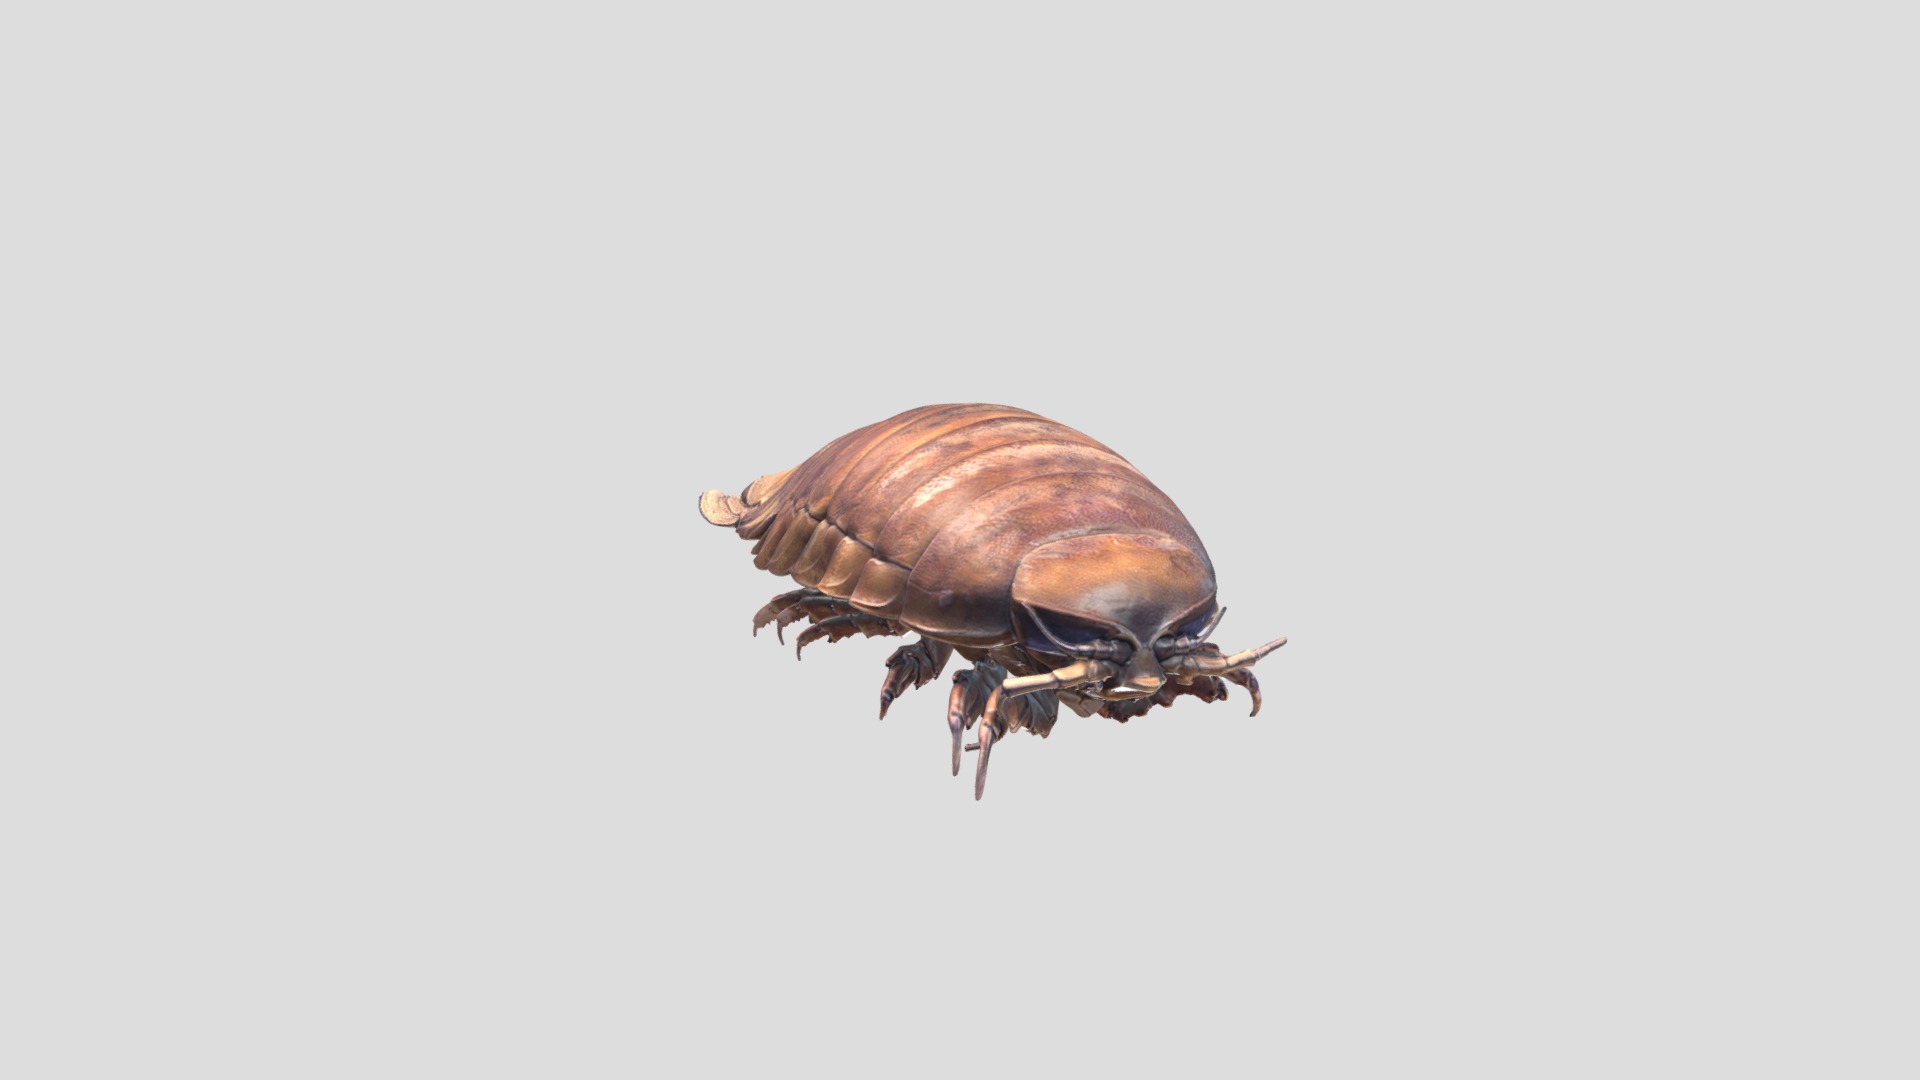 3D model Giant Isopod – Bathynomus giganteus - This is a 3D model of the Giant Isopod - Bathynomus giganteus. The 3D model is about a bug on a white background.